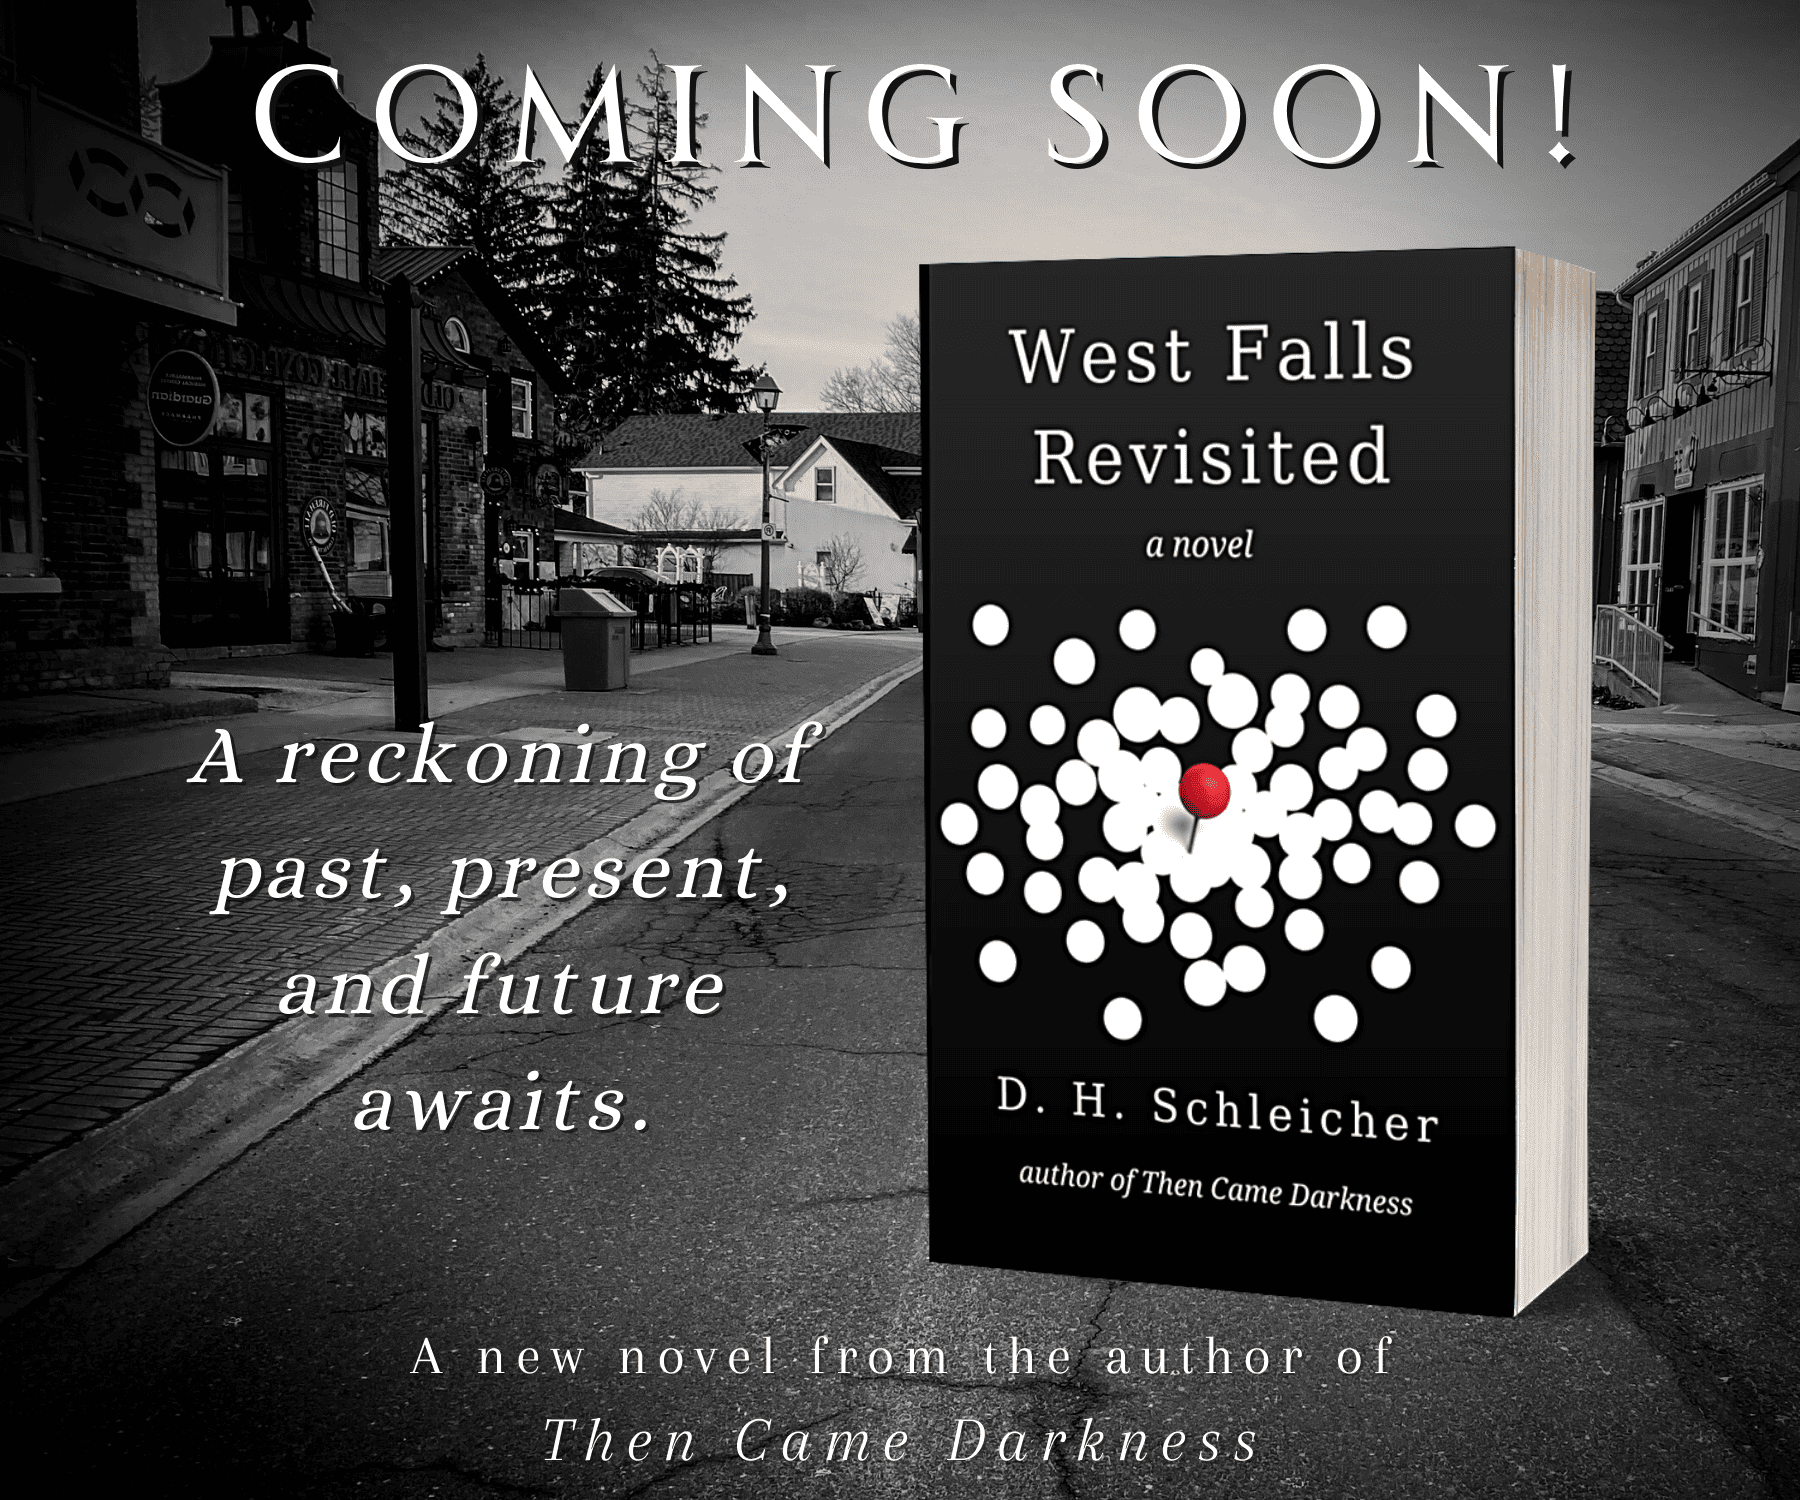 Coming Soon - West Falls Revisited book cover